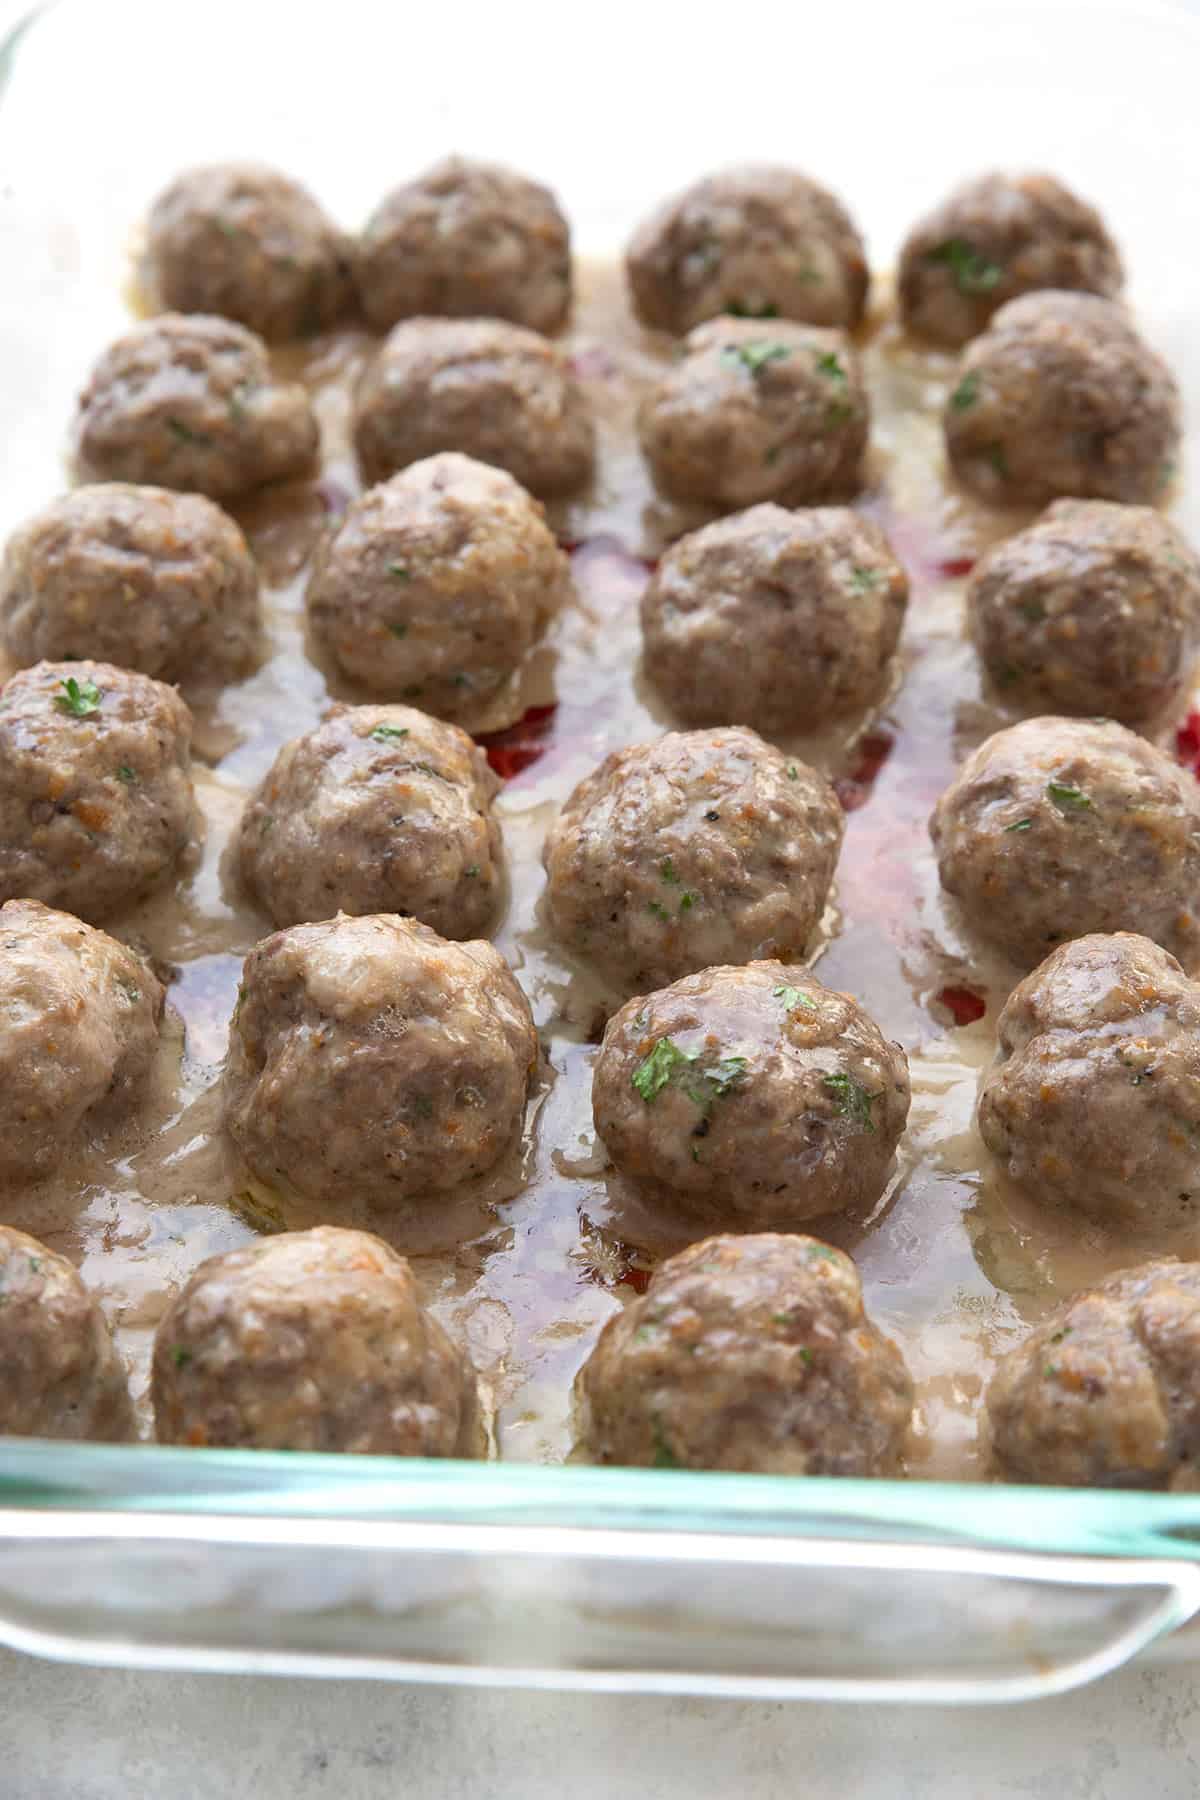 Baked keto meatballs in a glass baking dish.